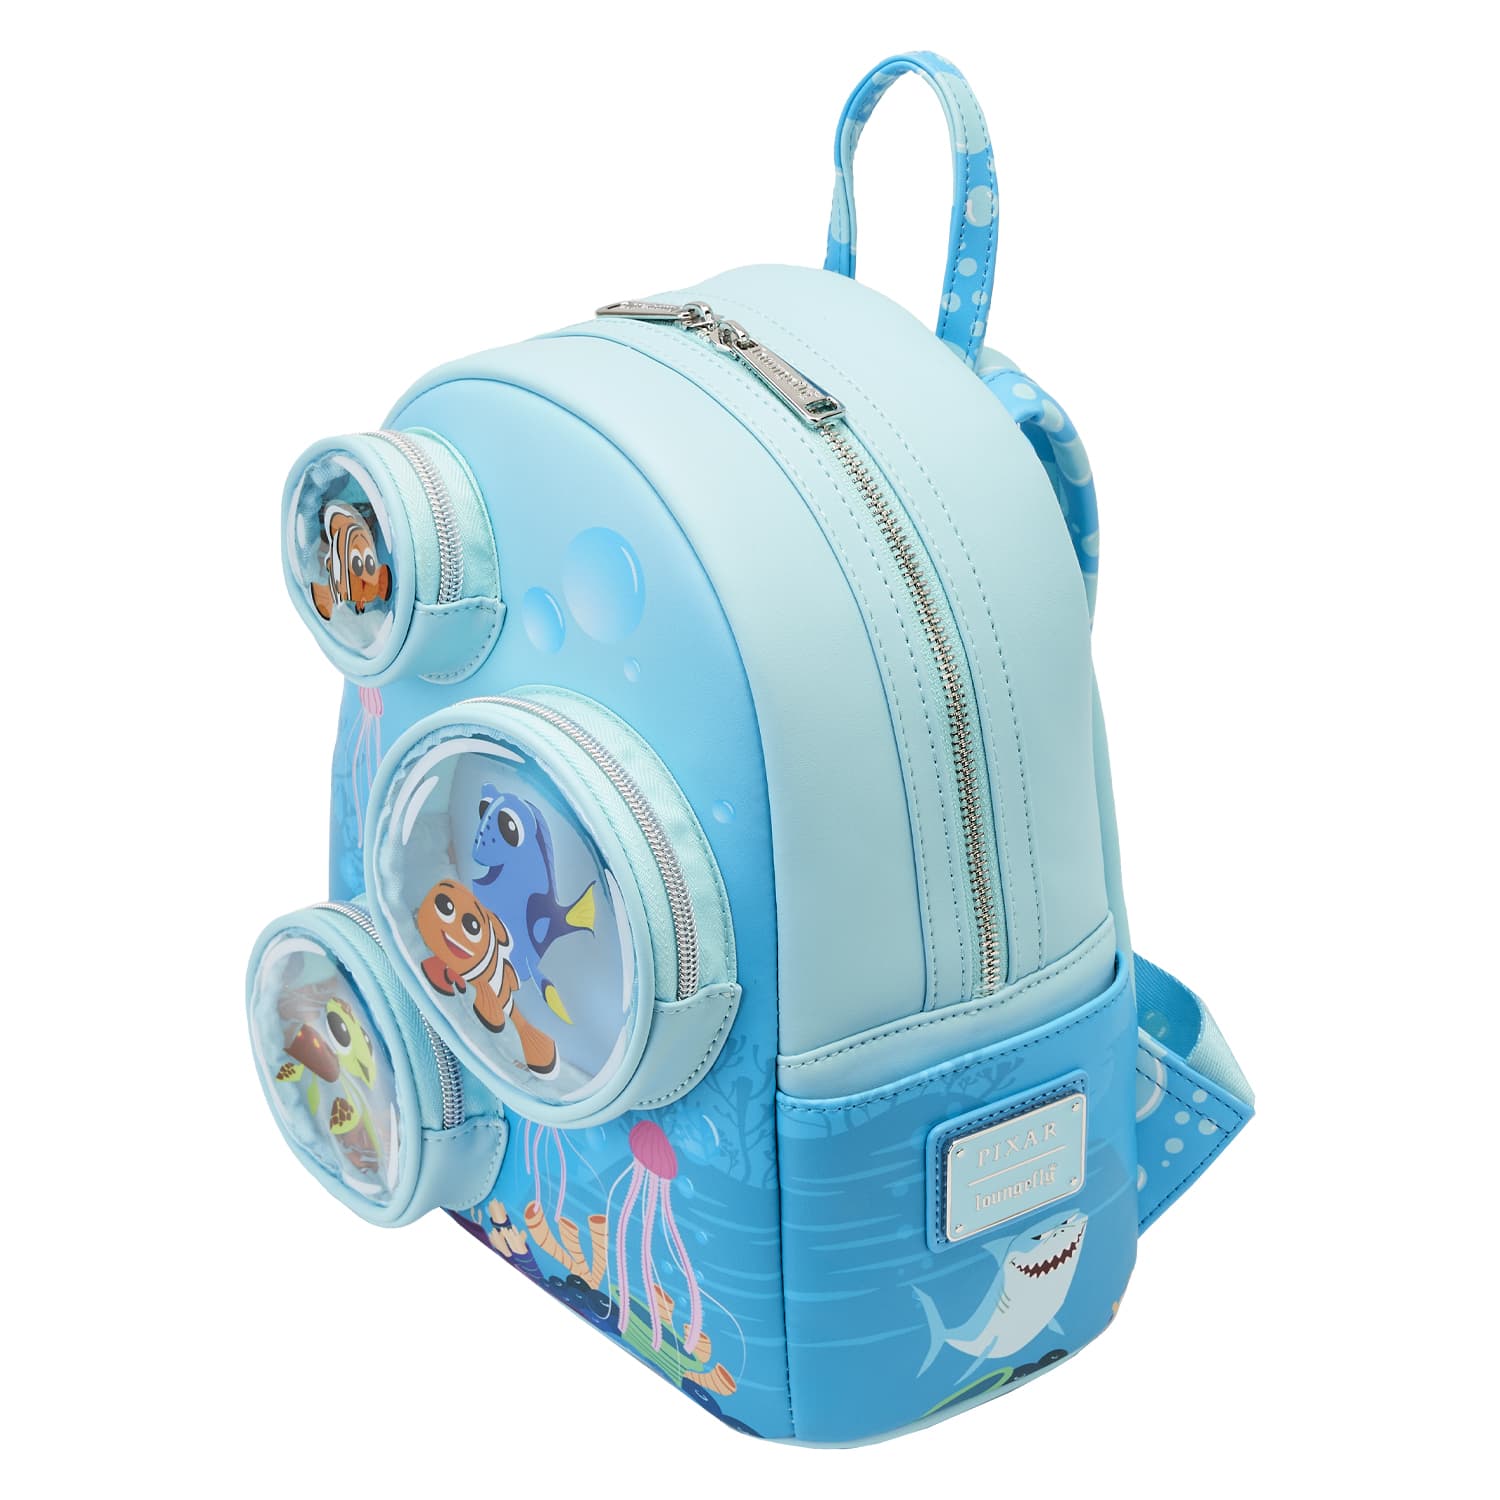 Buy Finding Nemo 20th Anniversary Bubble Pocket Mini Backpack at Loungefly.